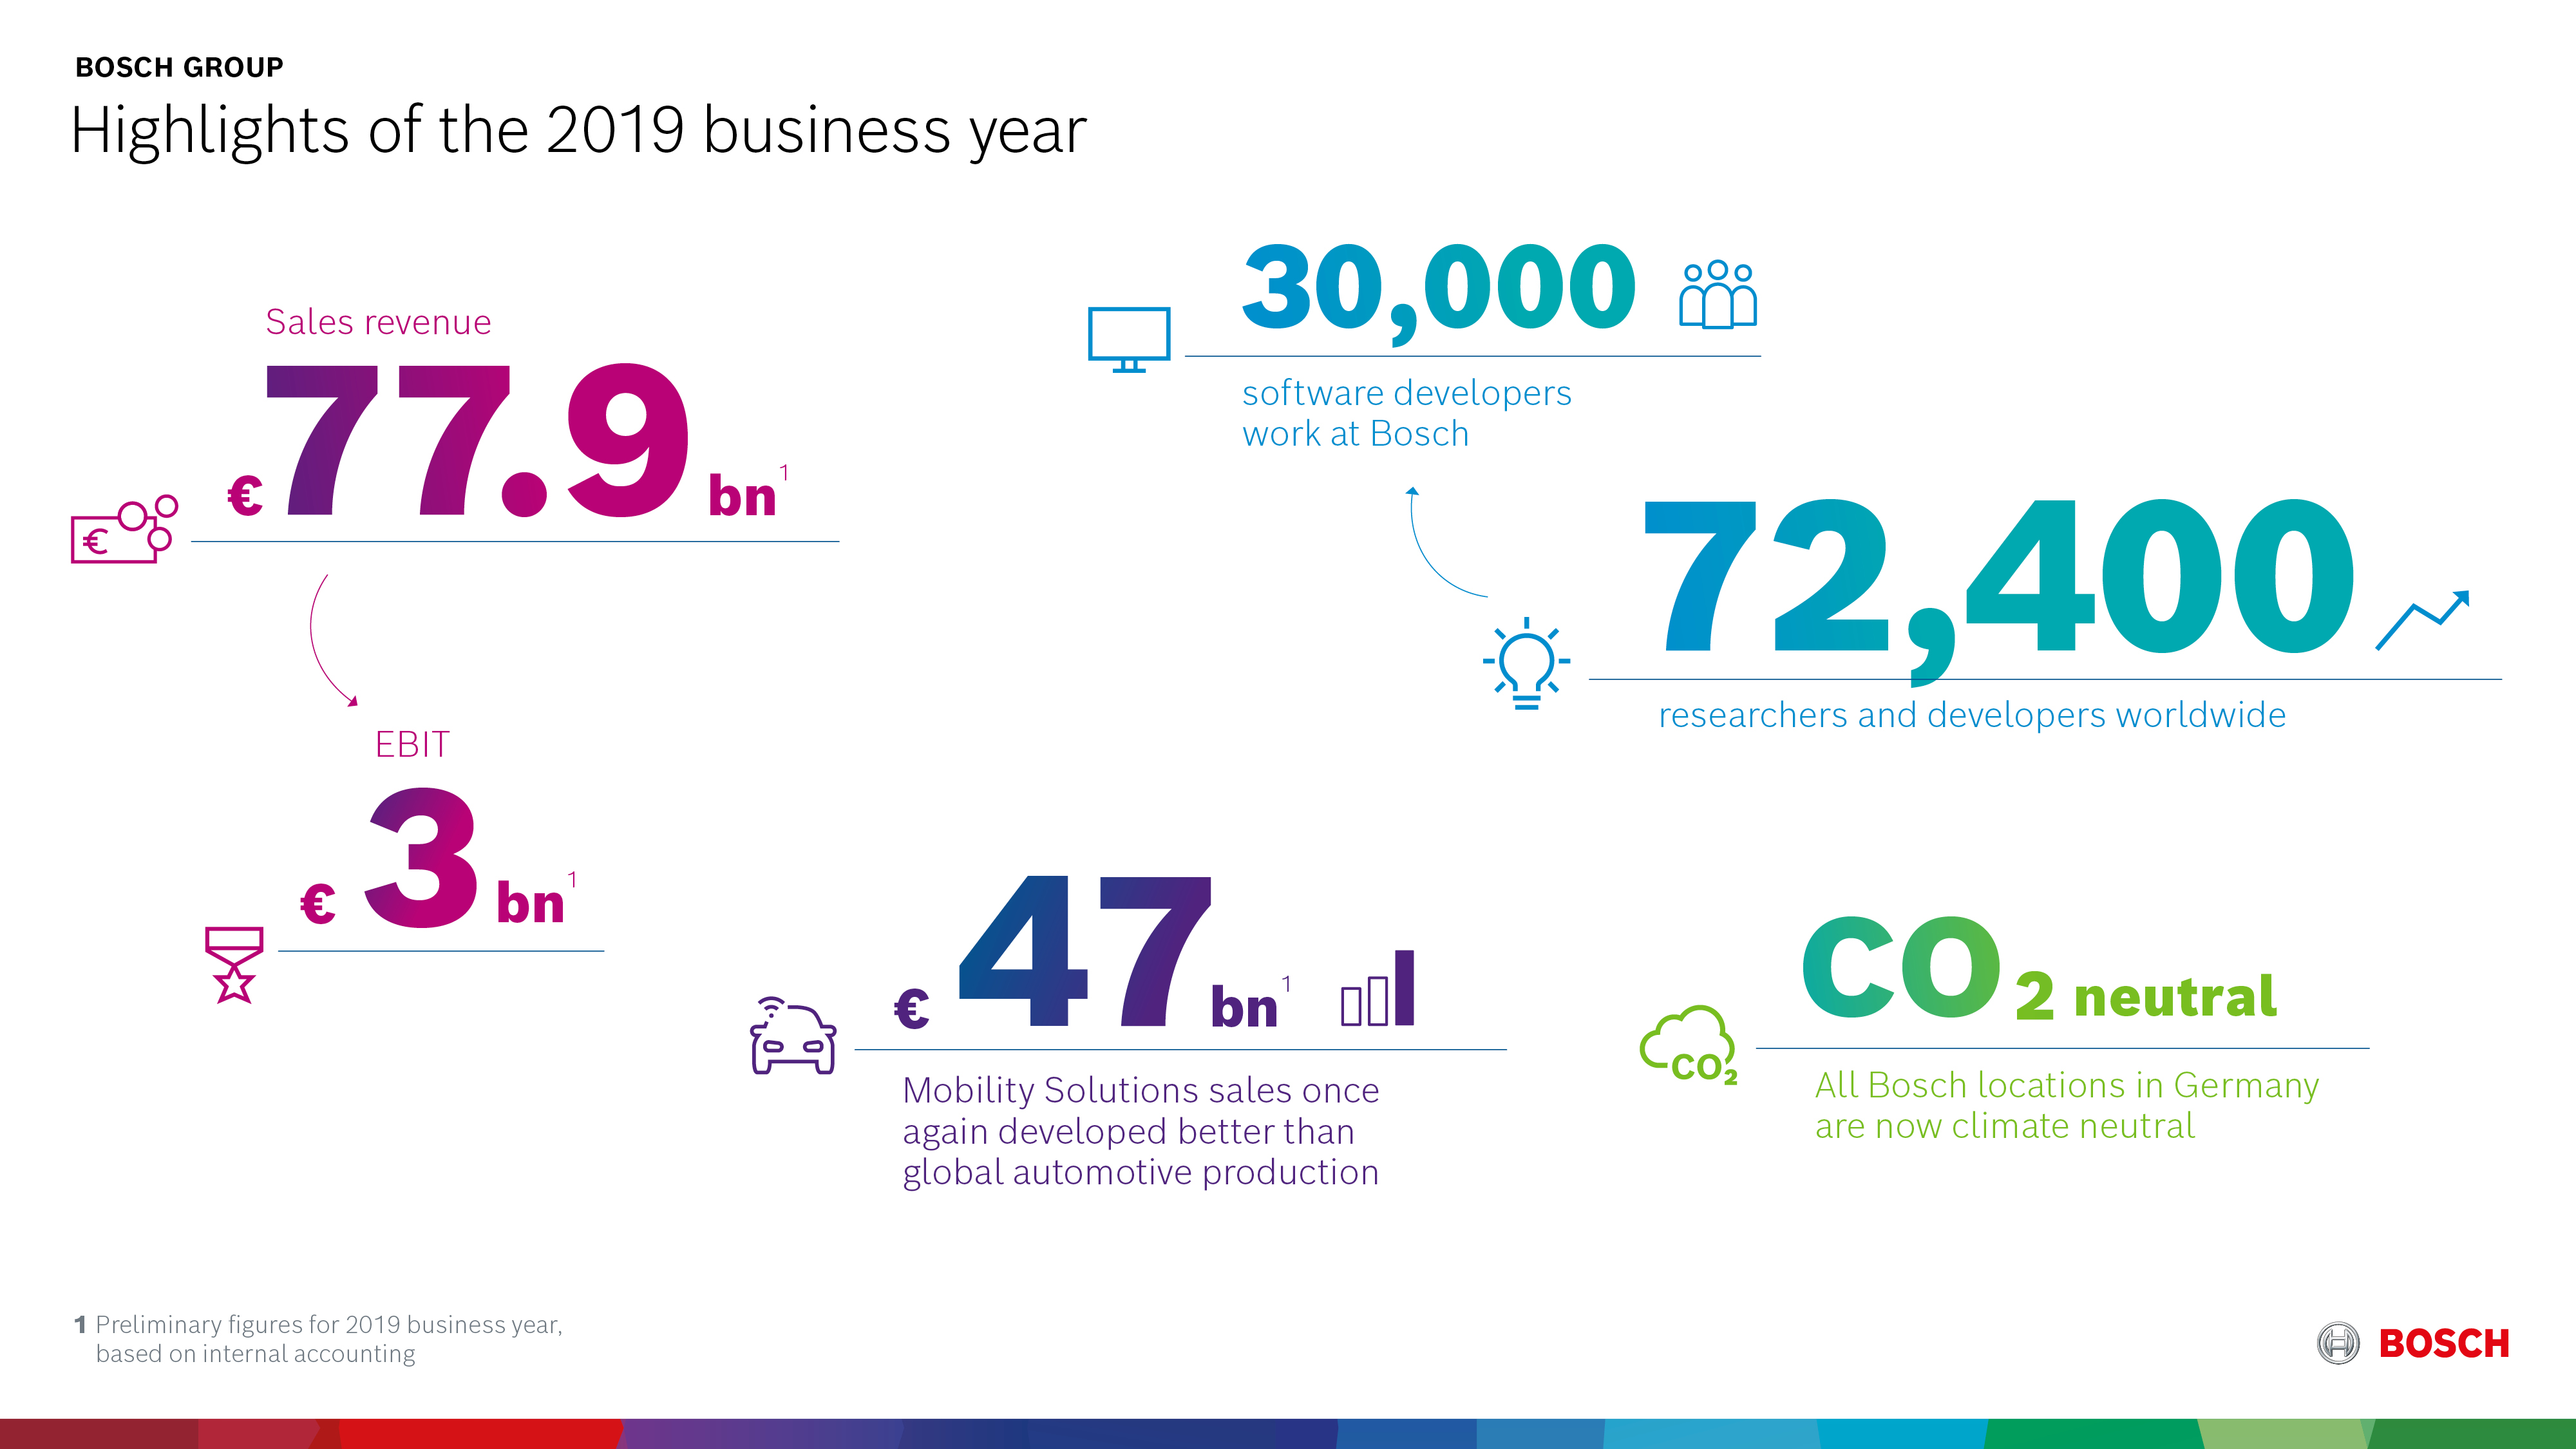 Highlights of the 2019 business year